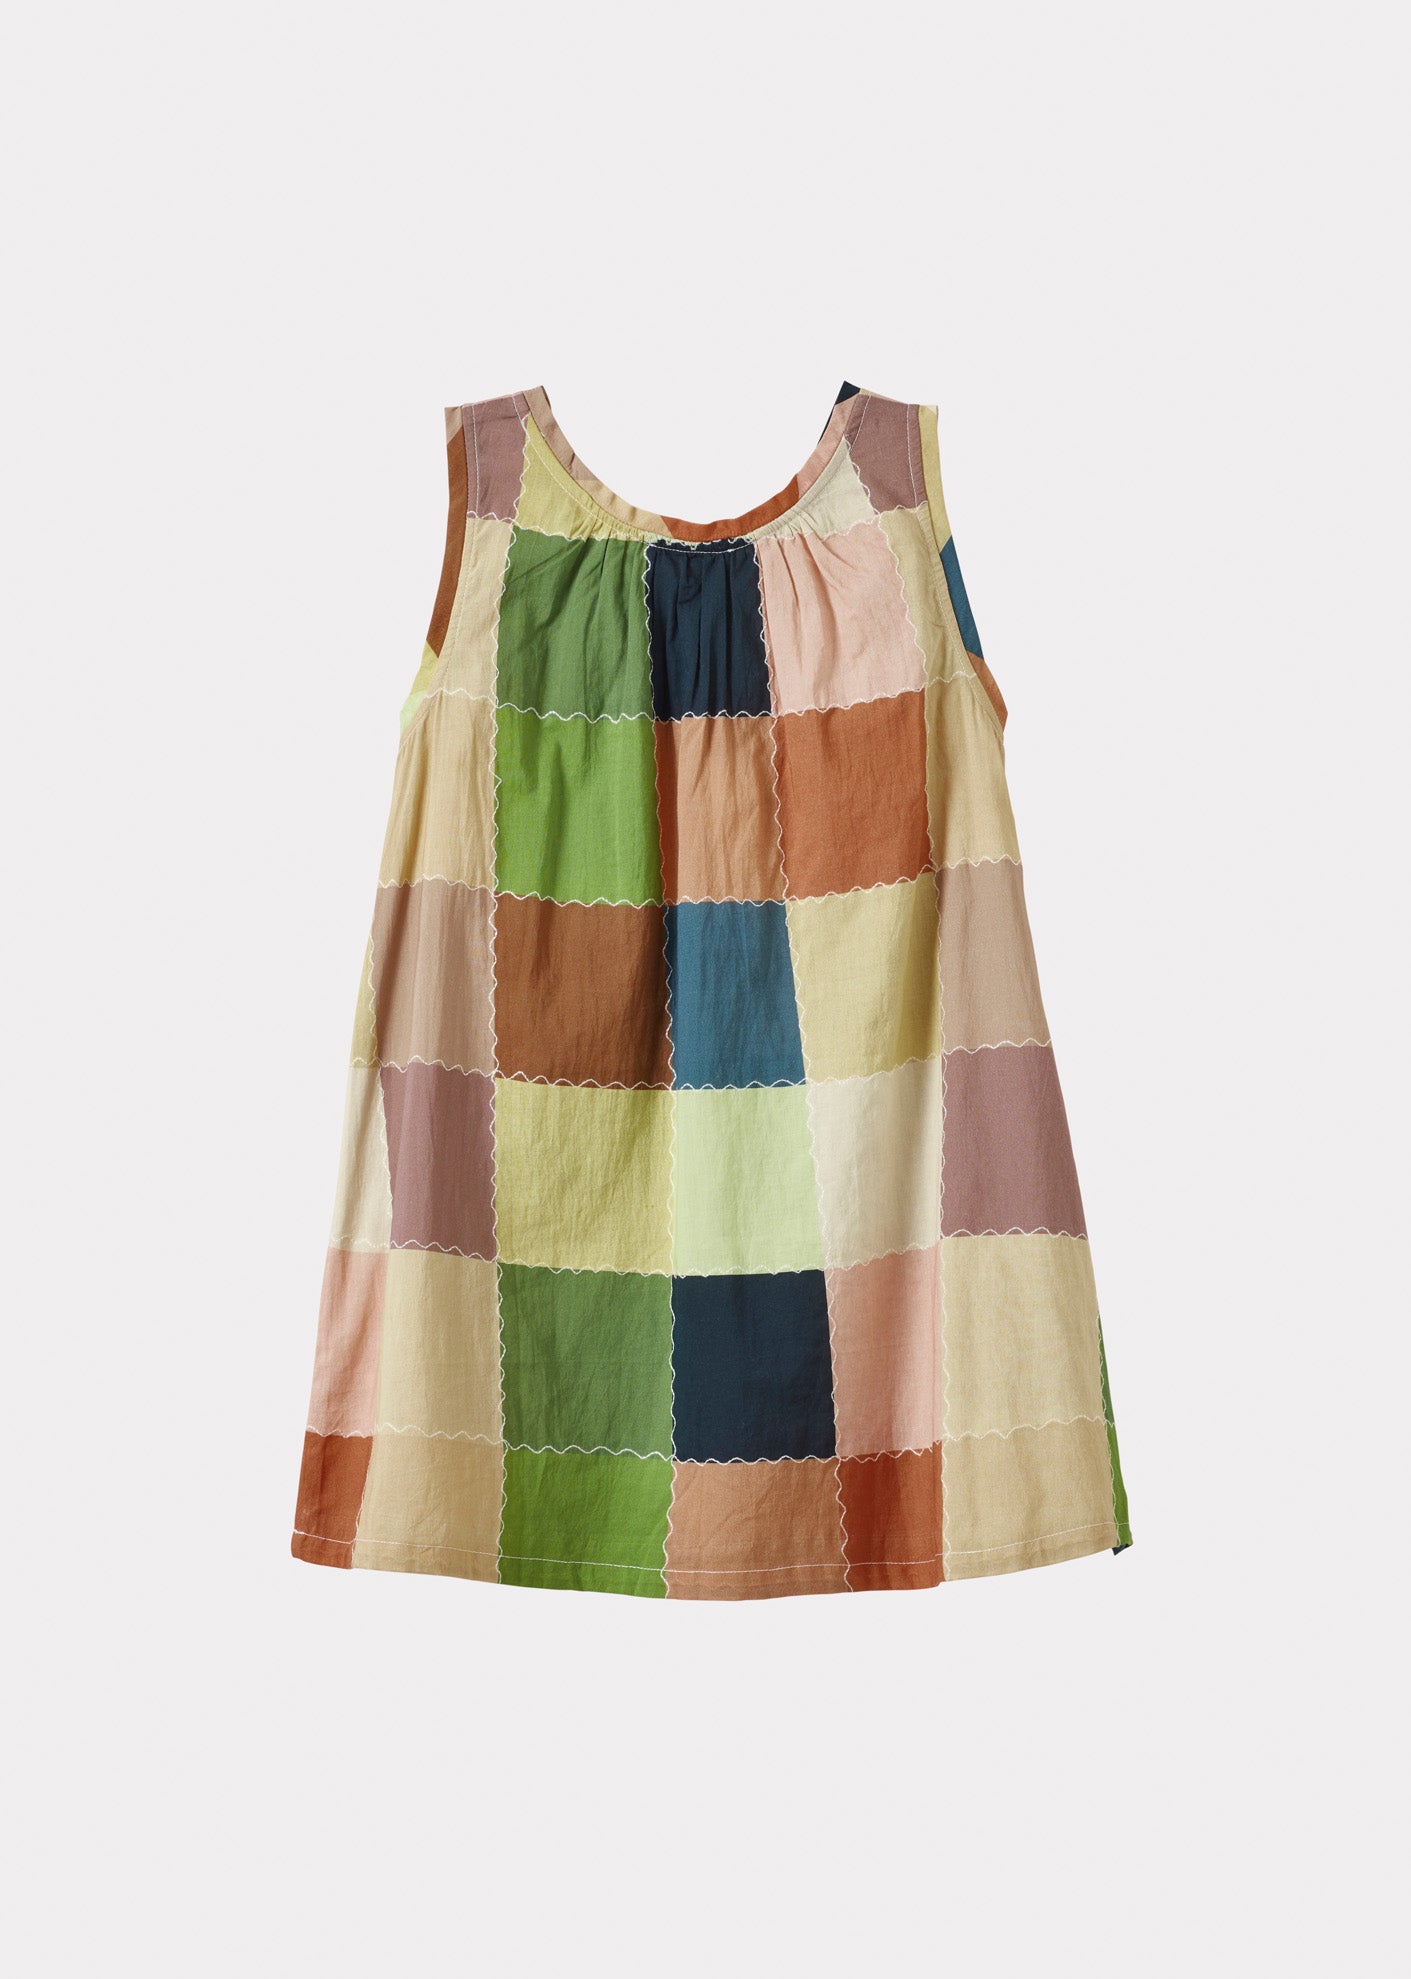 CICELY DRESS TEEN - GREEN/MULTICOLOUR PATCHWORK